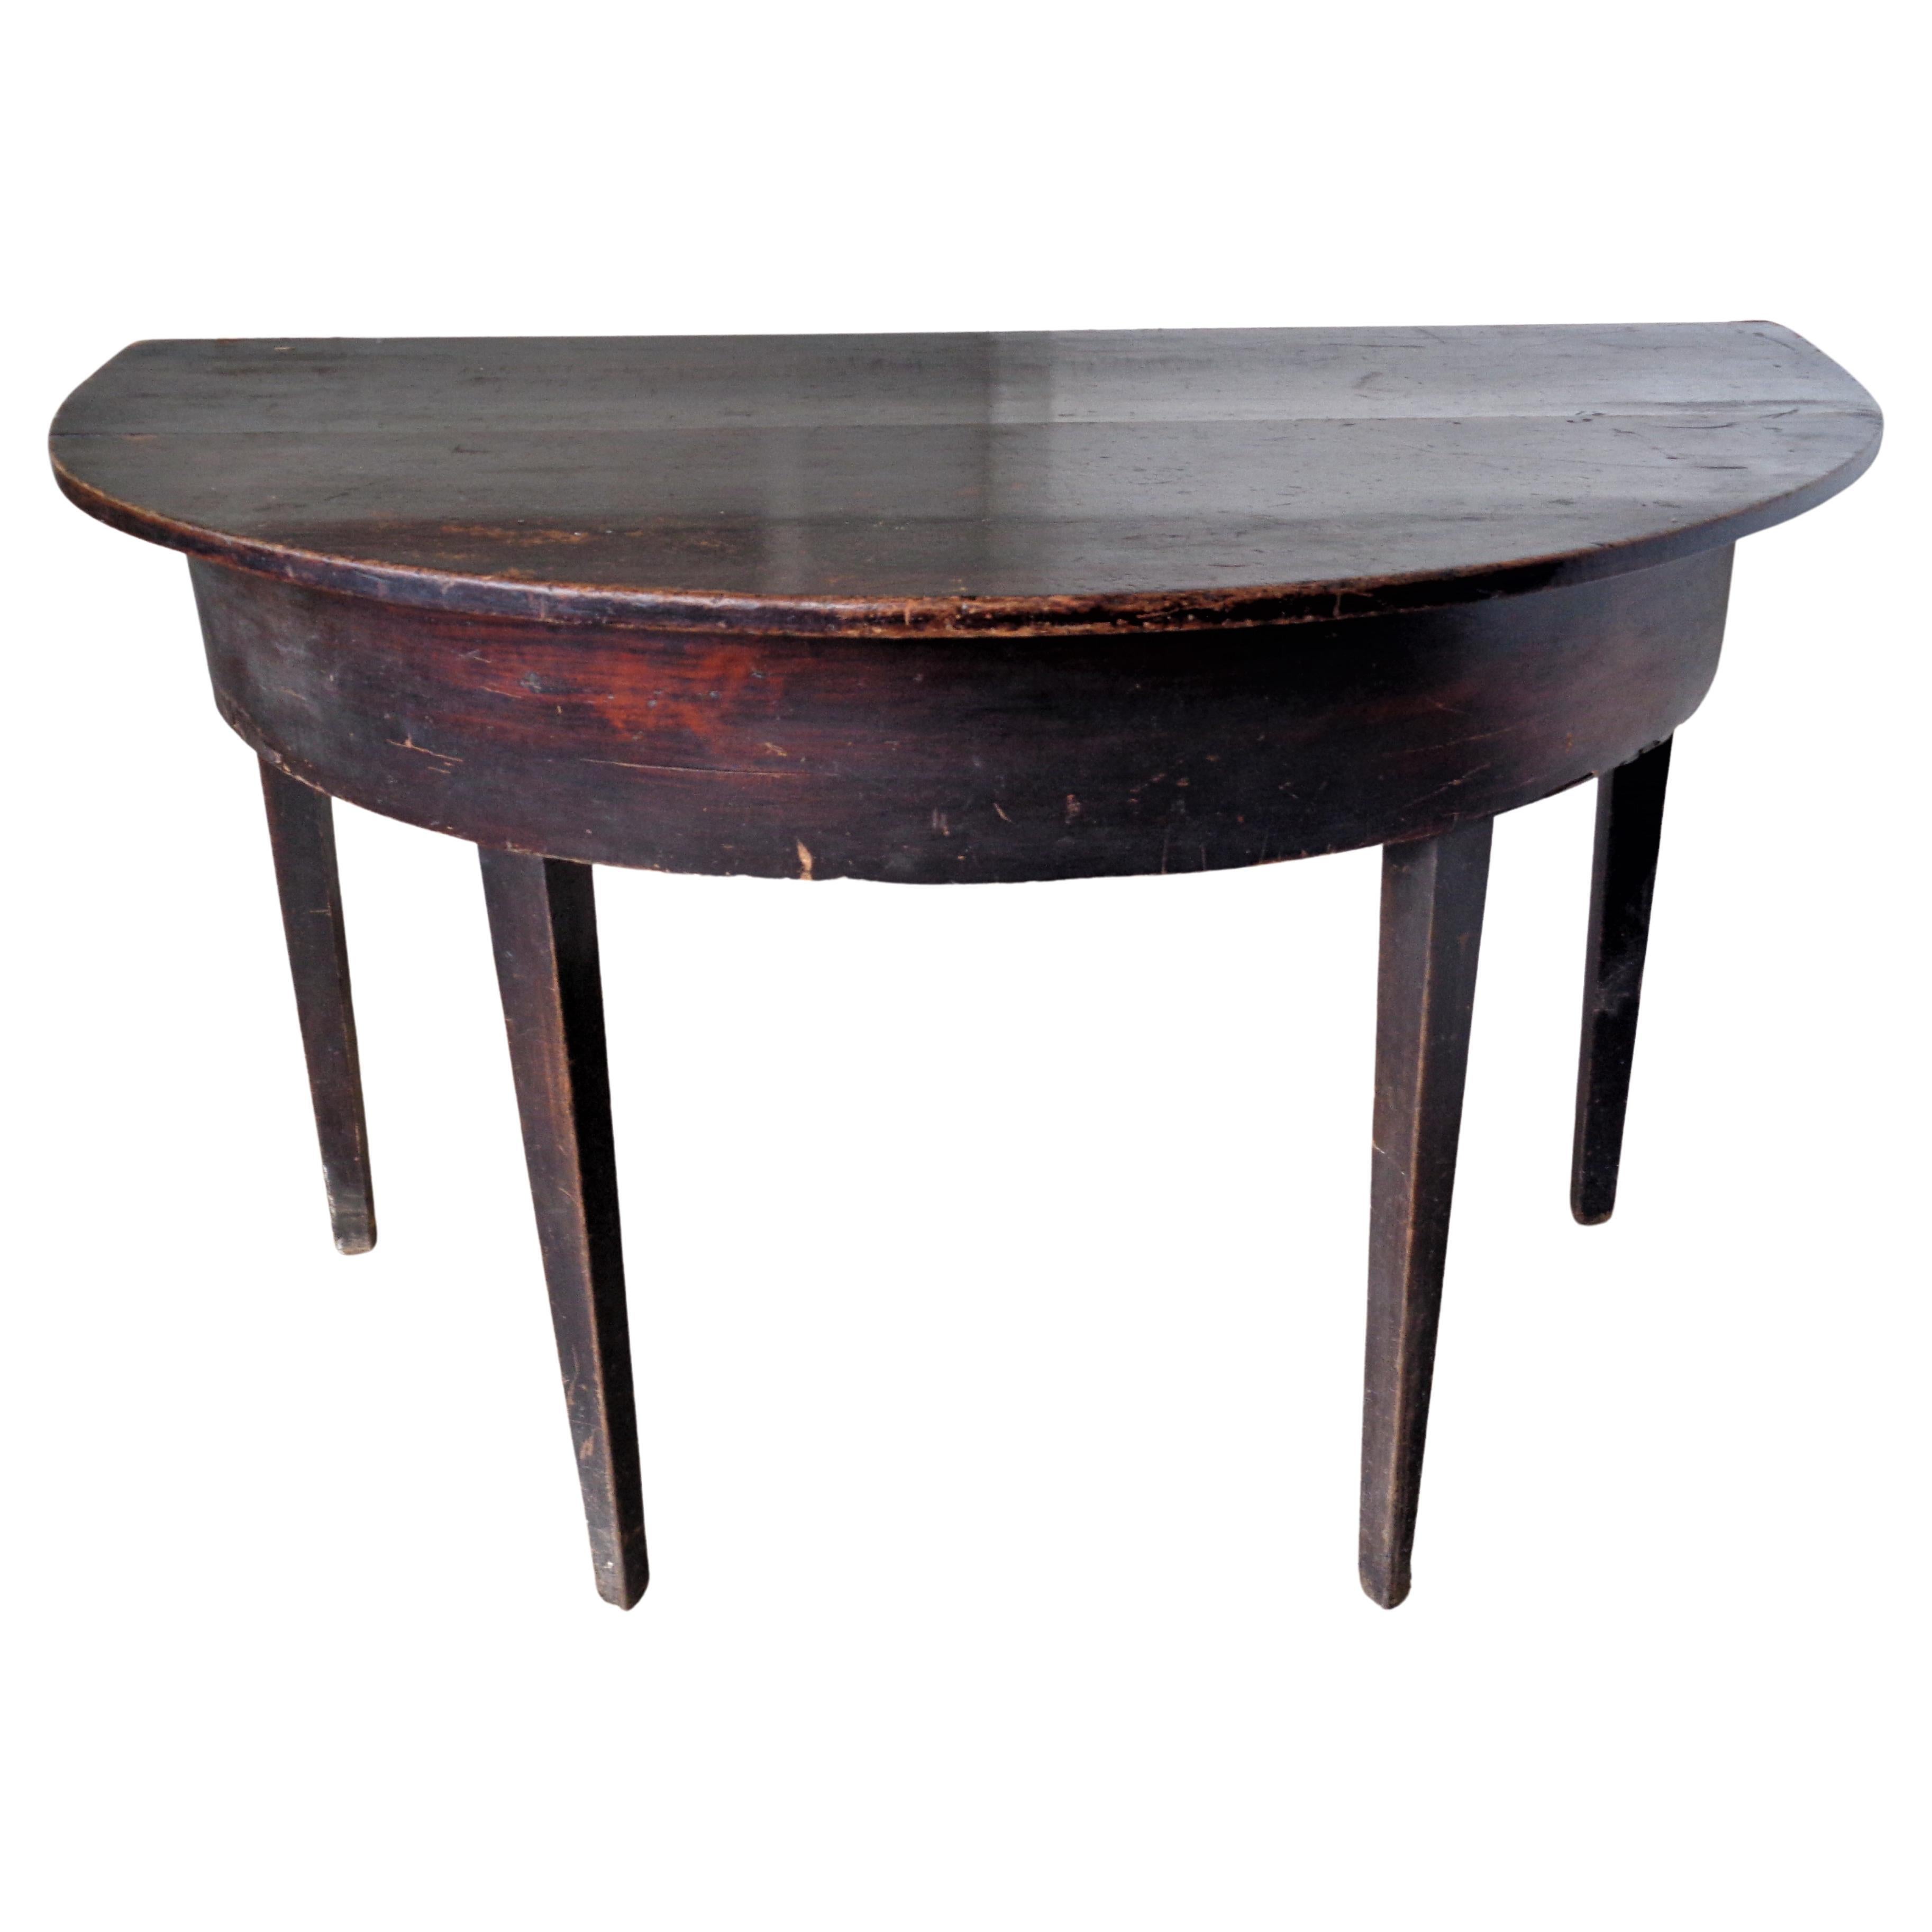 Early 19th Century American Country Demilune Table  For Sale